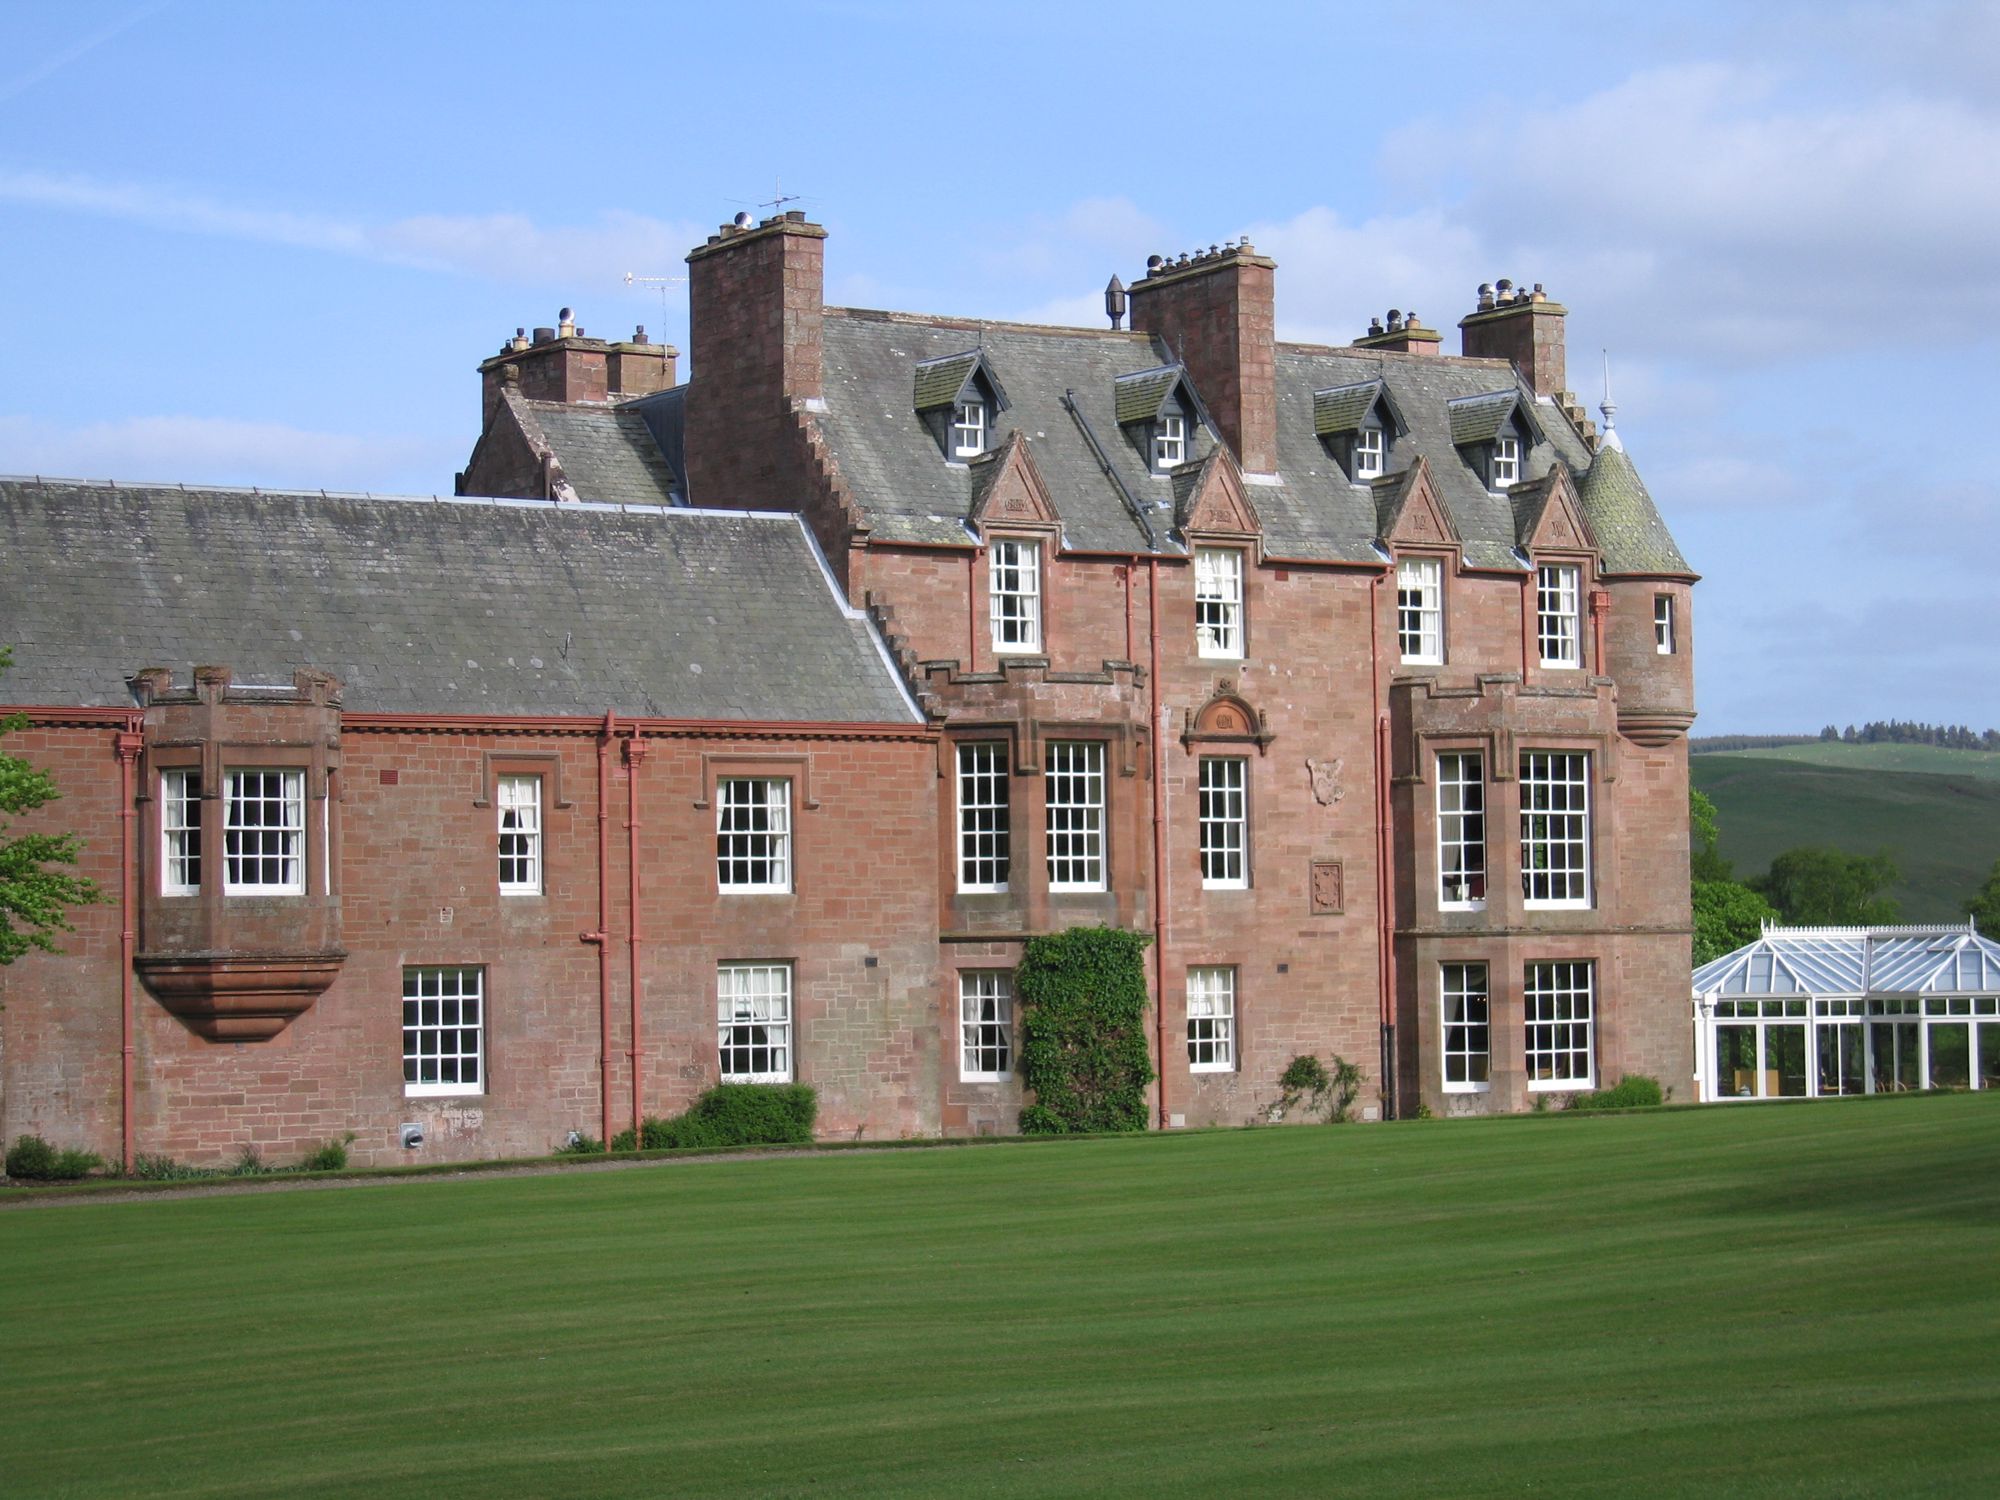 Hotels in Scottish Borders holidays at Cool Places